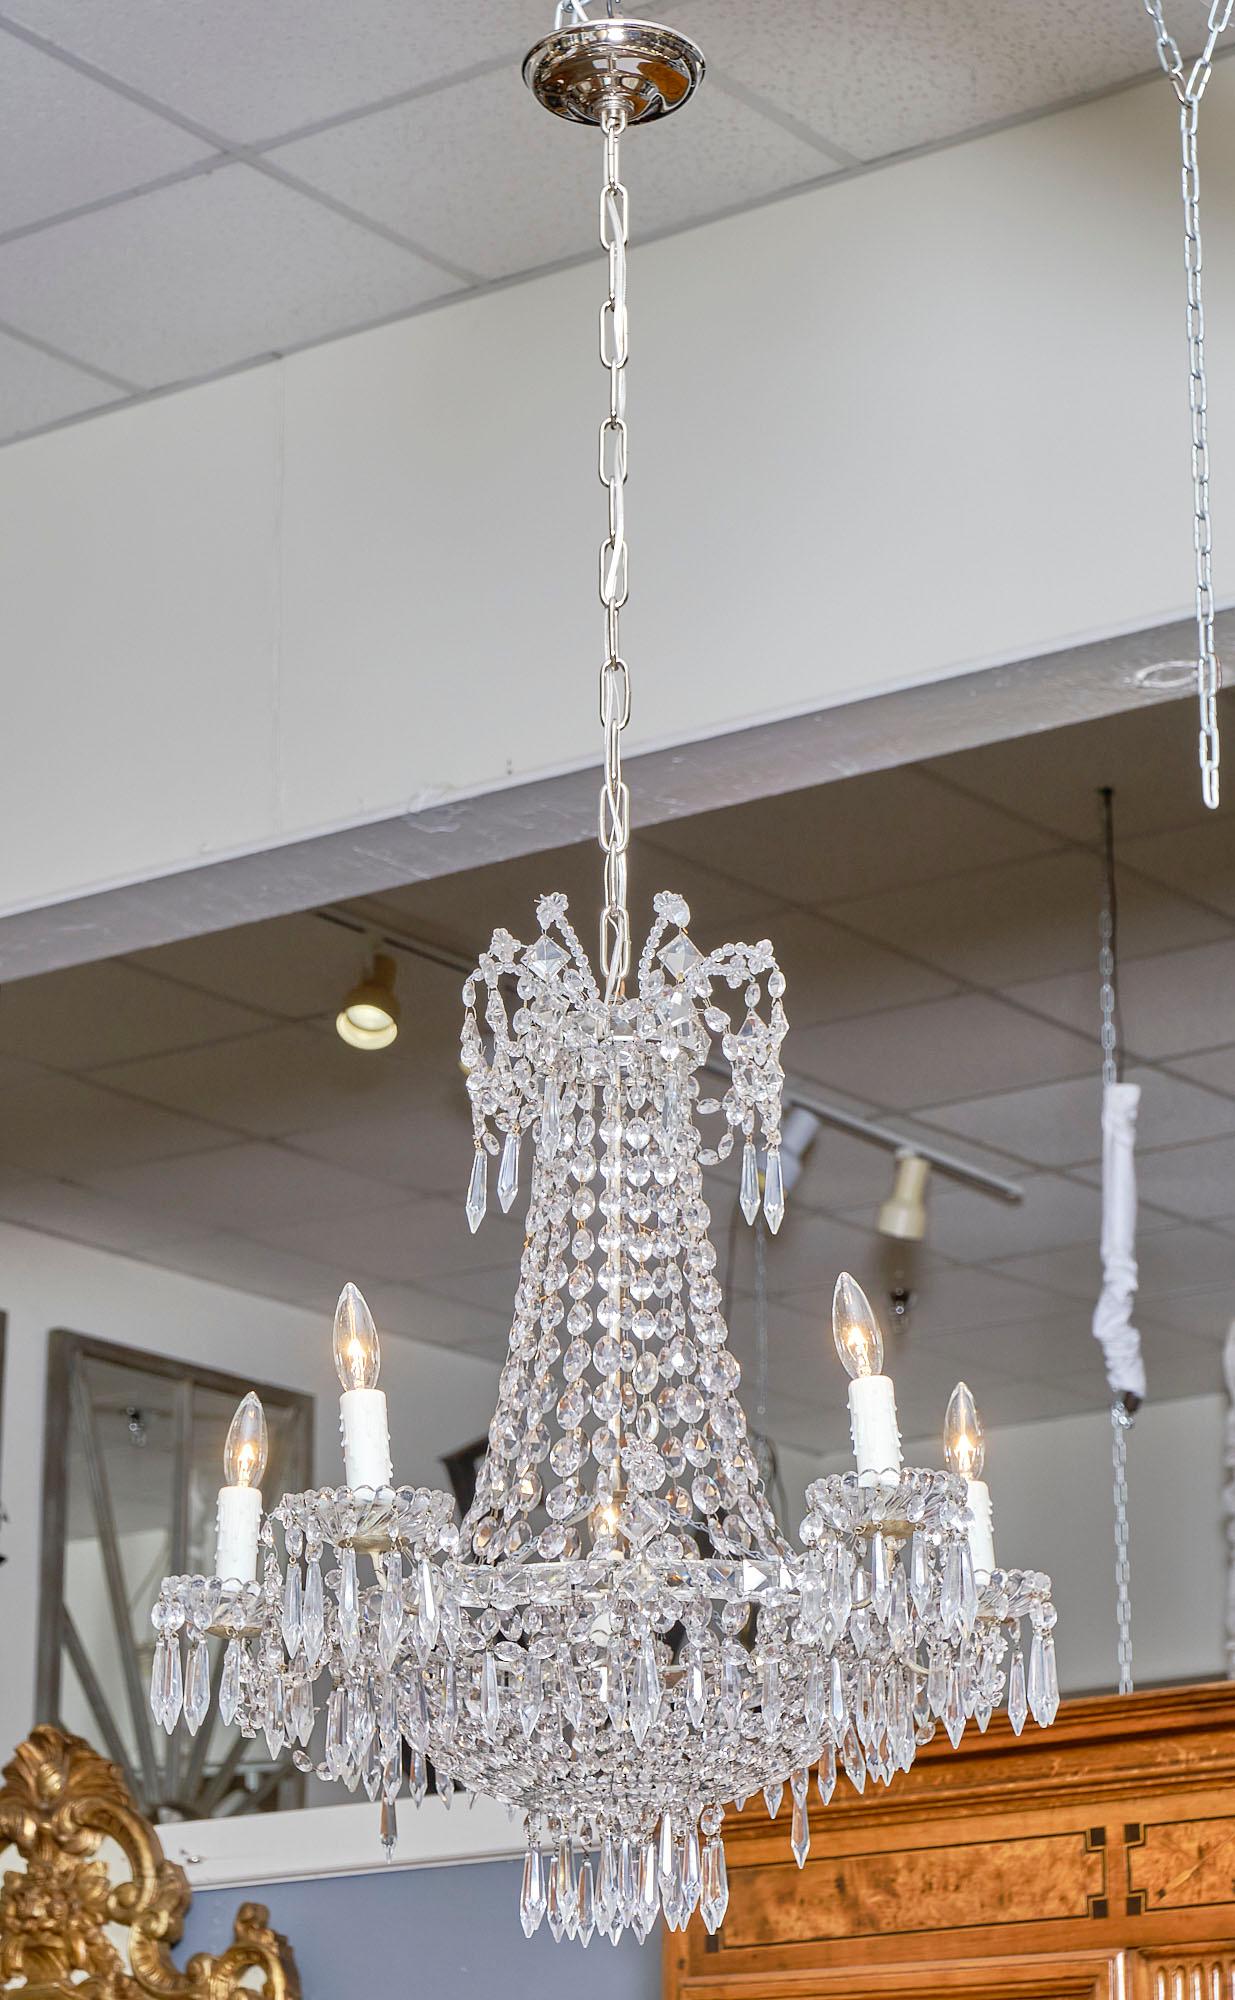 Chandelier from France, “Corbeille” made of cut crystal by Baccarat. This piece has been newly wired to fit US standards.